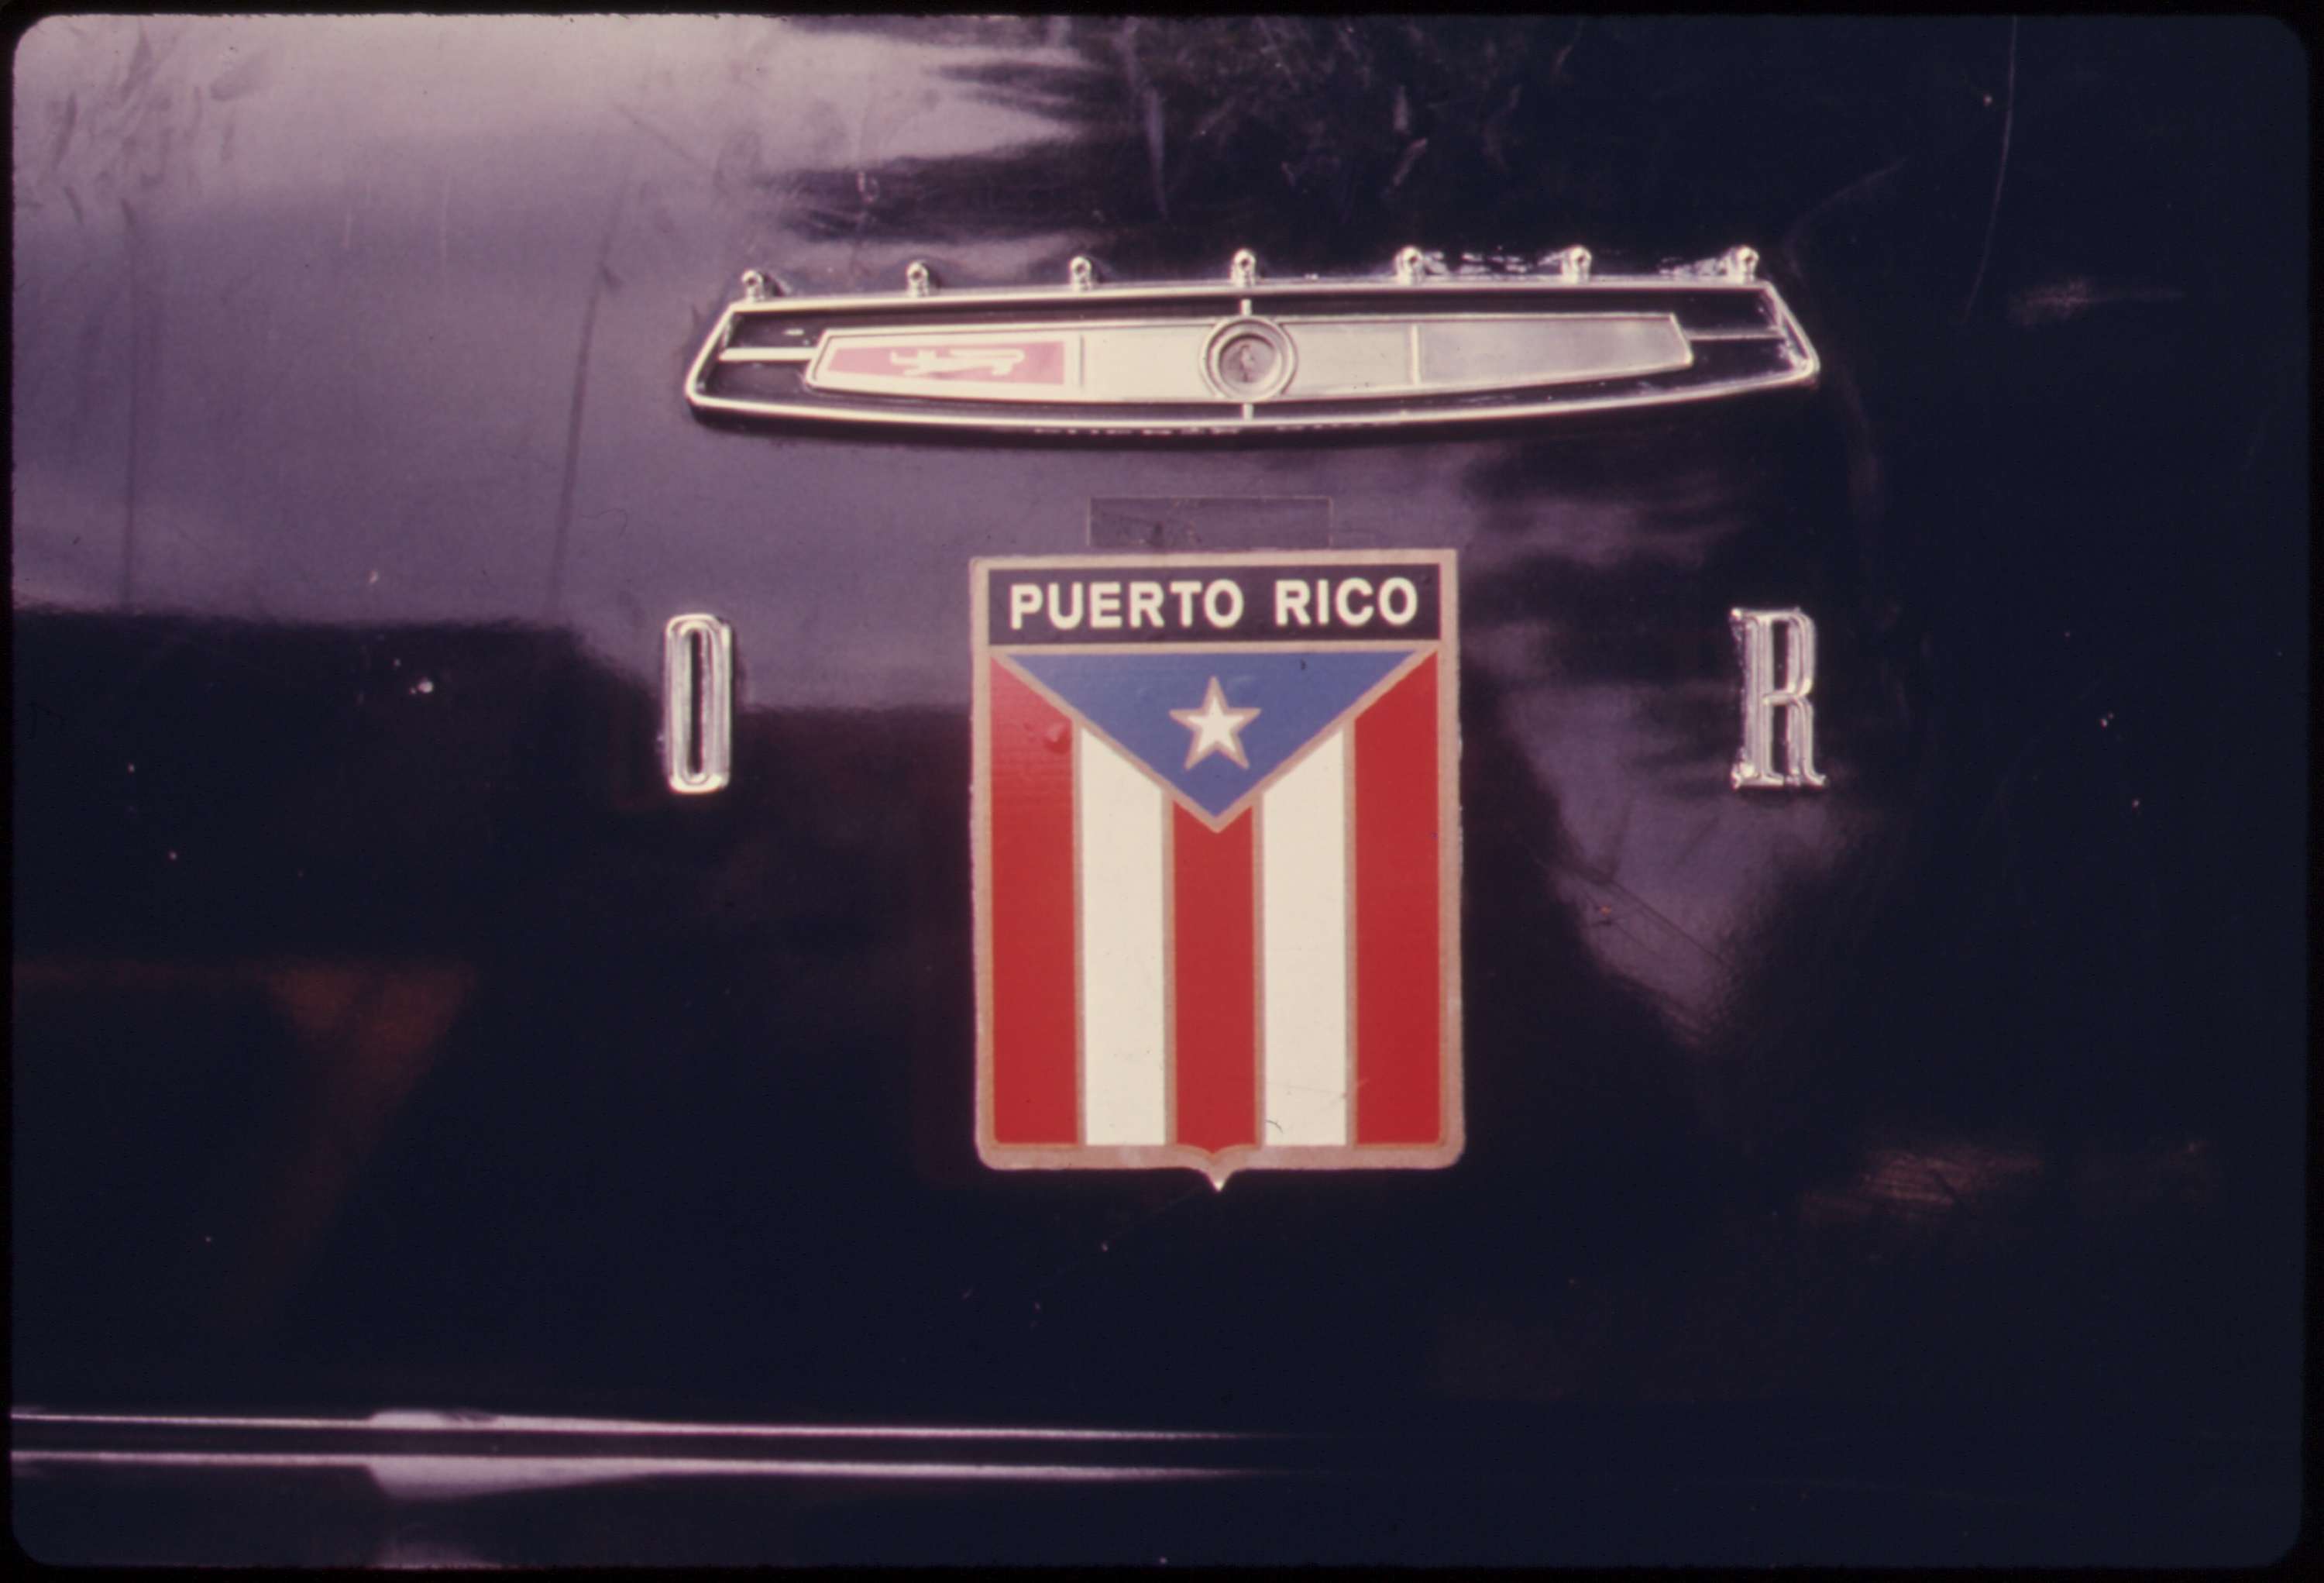 Emblem of Puerto Rico on a car in Paterson, NJ